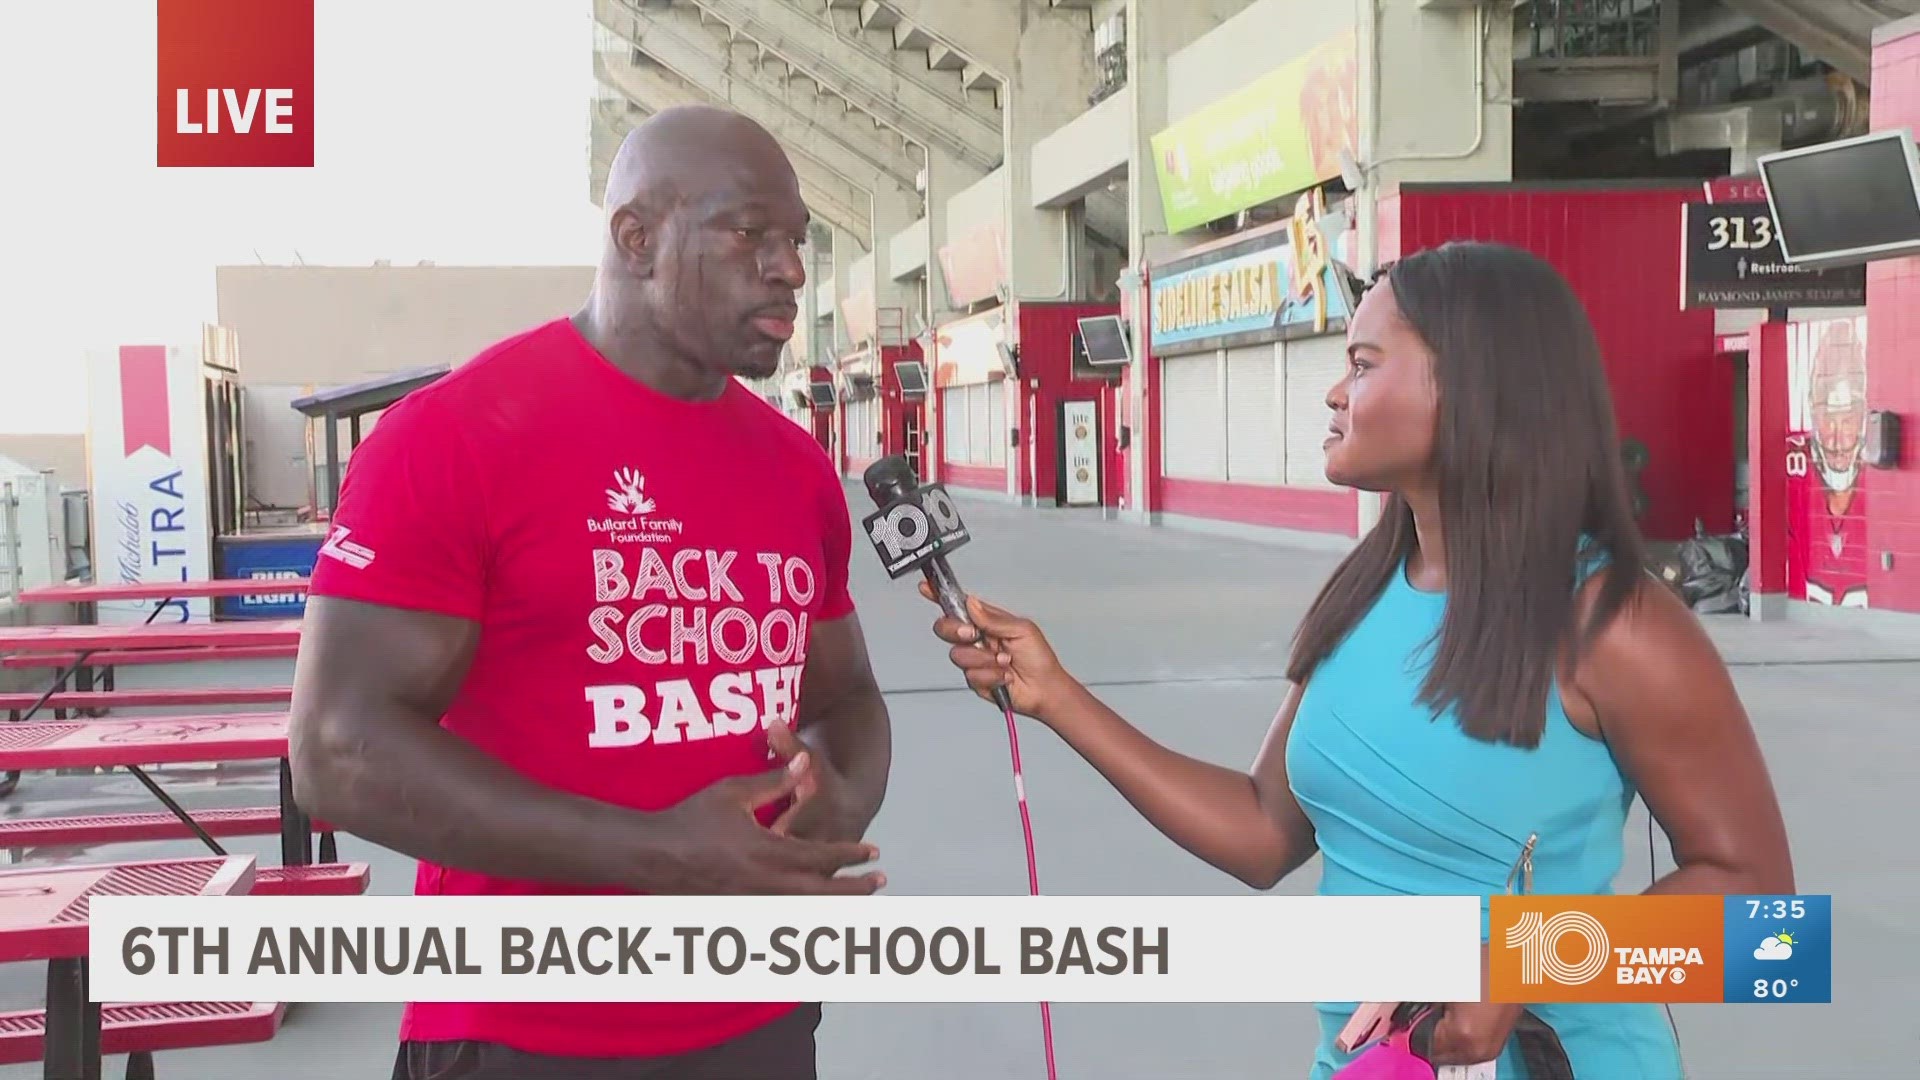 WWE Global Ambassador Titus O'Neil and his Bullard Foundation plan to give away 30,000 backpacks of supplies to school-age children.